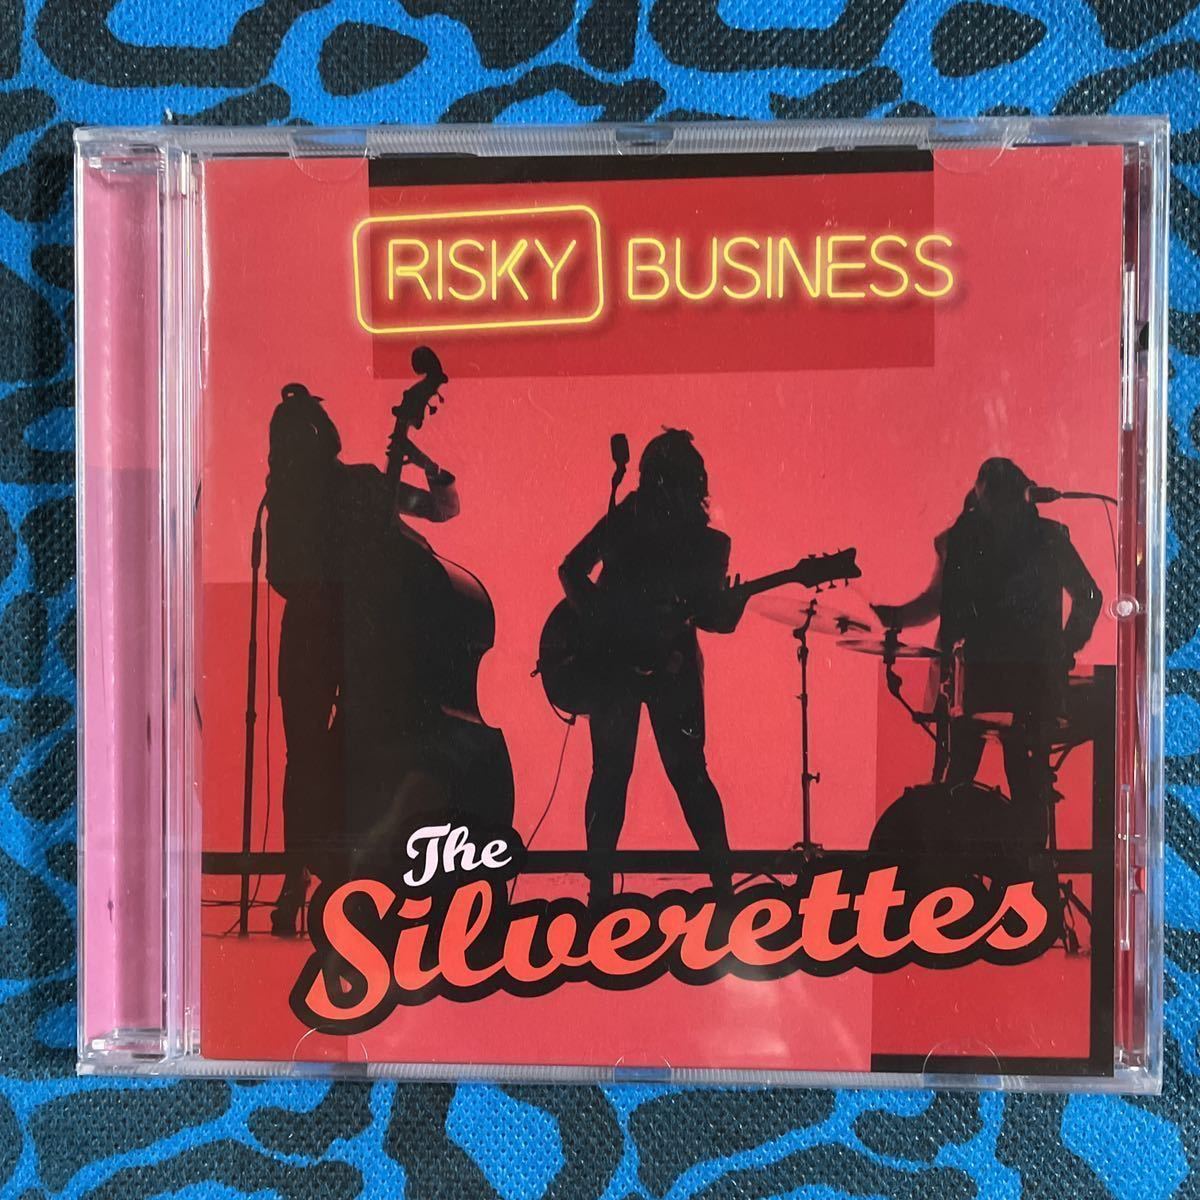 THE SILVERETTES NEWアルバムRISKY BUSINESS CD ネオロカビリー 